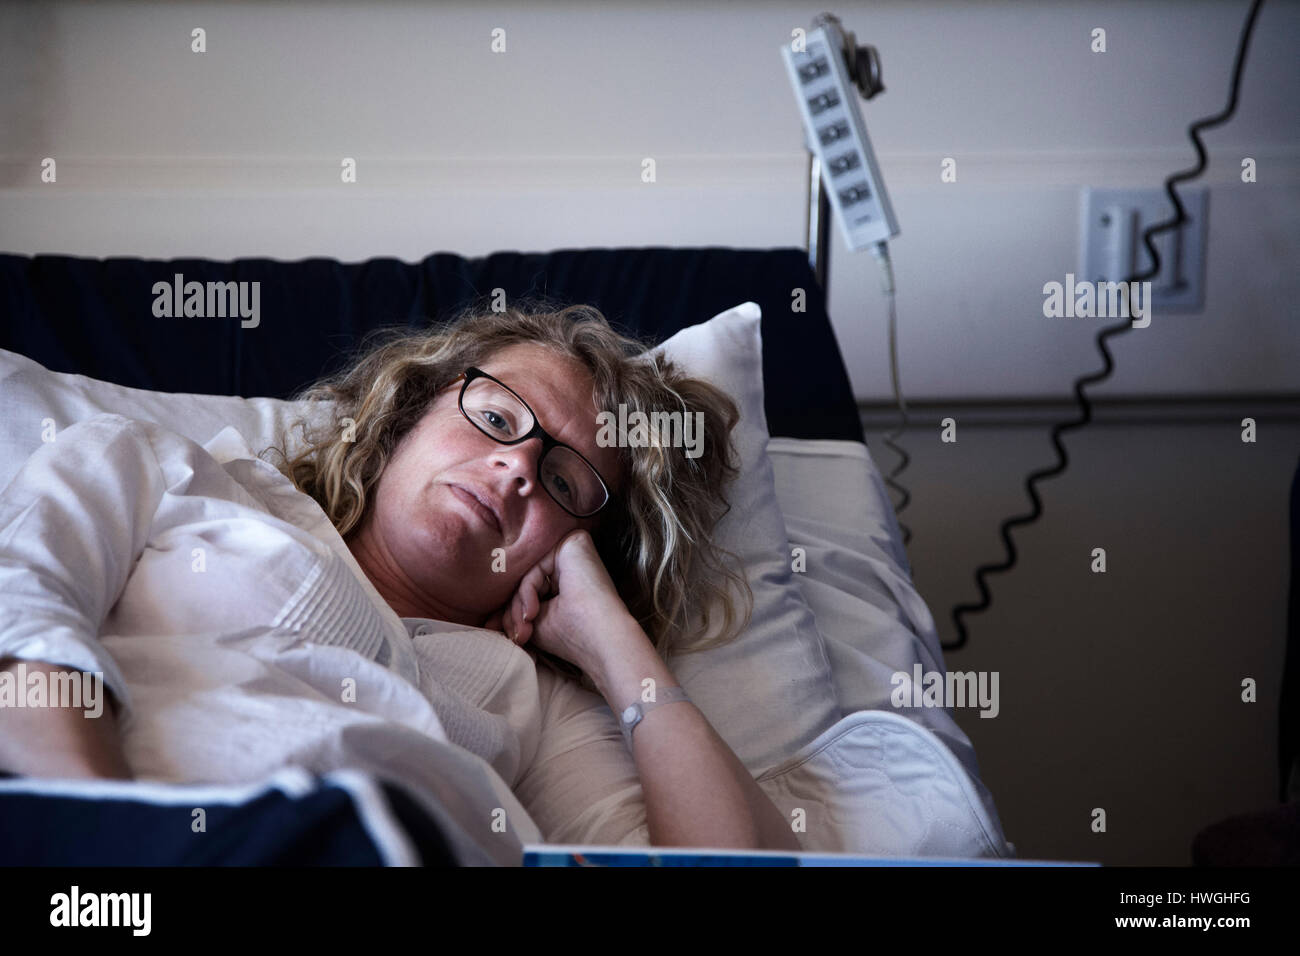 woman lying in hospital bed Stock Photo